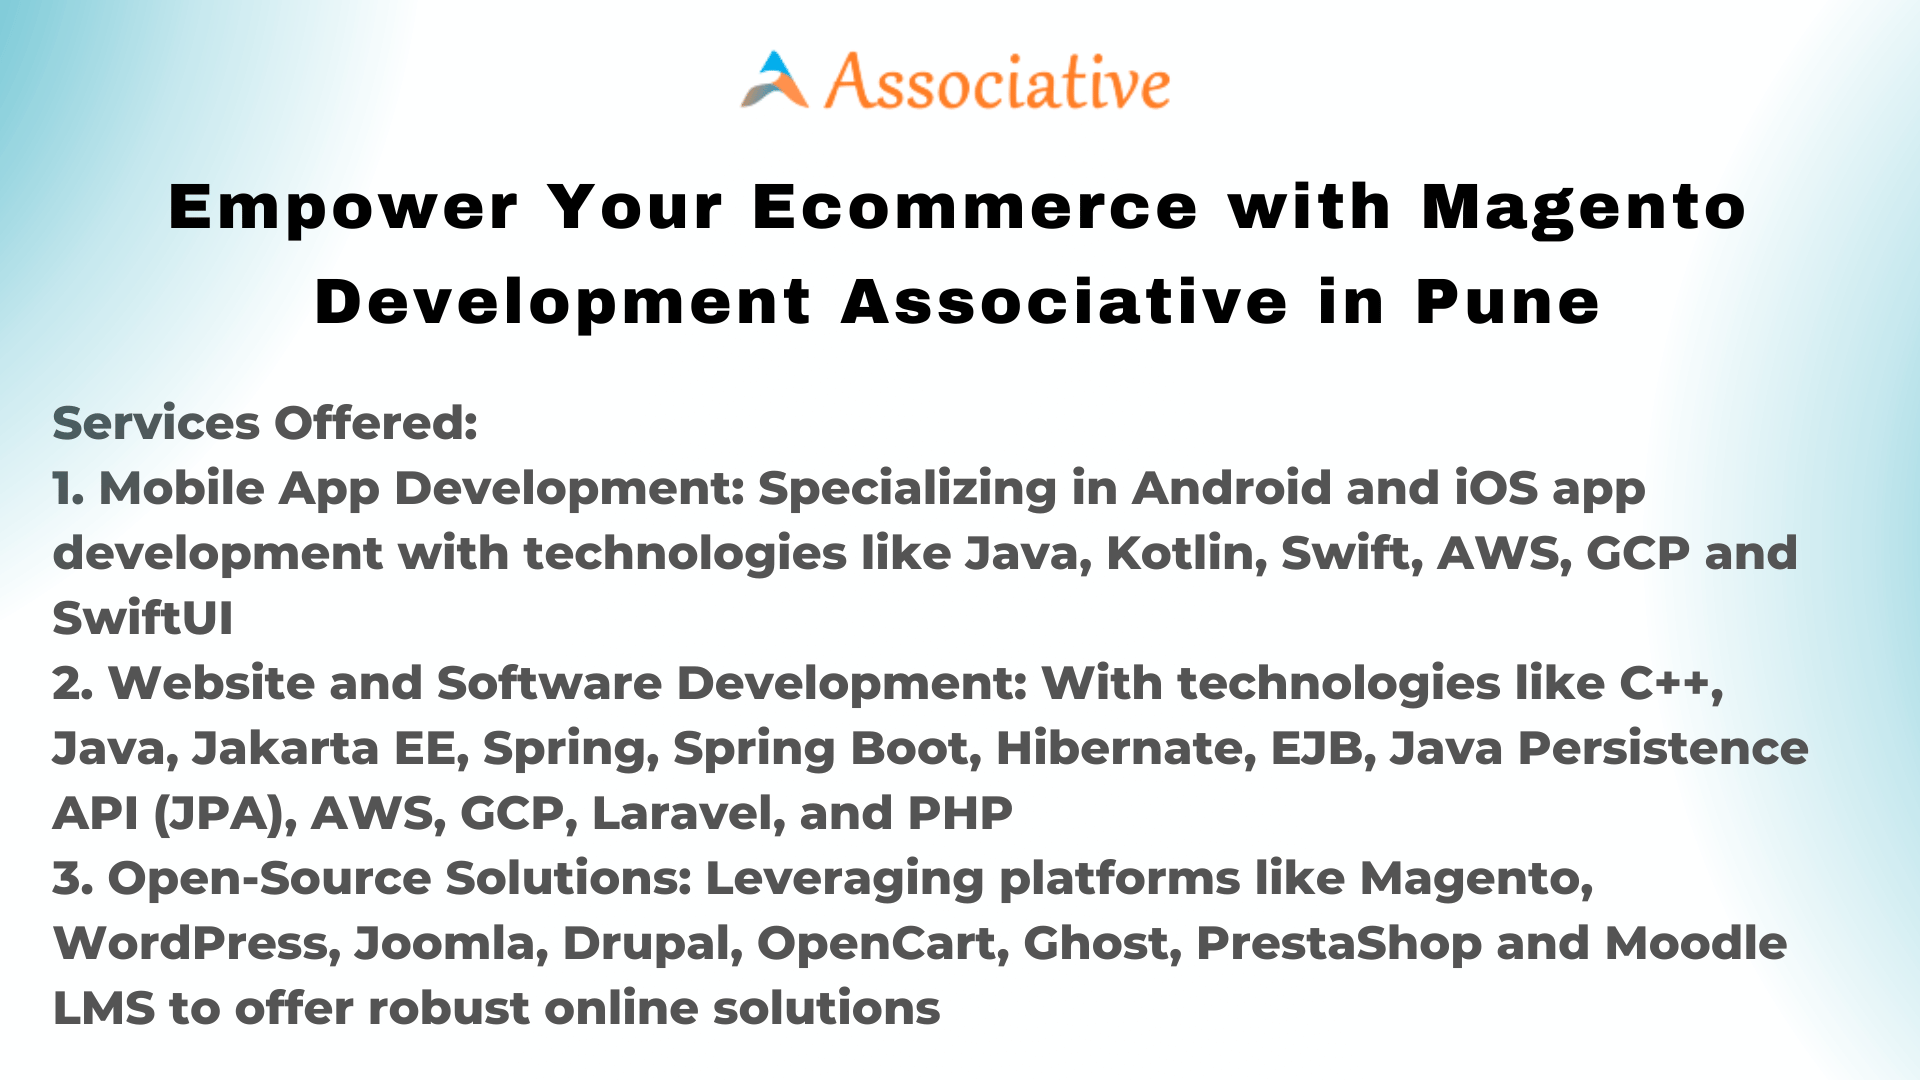 Empower Your Ecommerce with Magento Development Associative in Pune